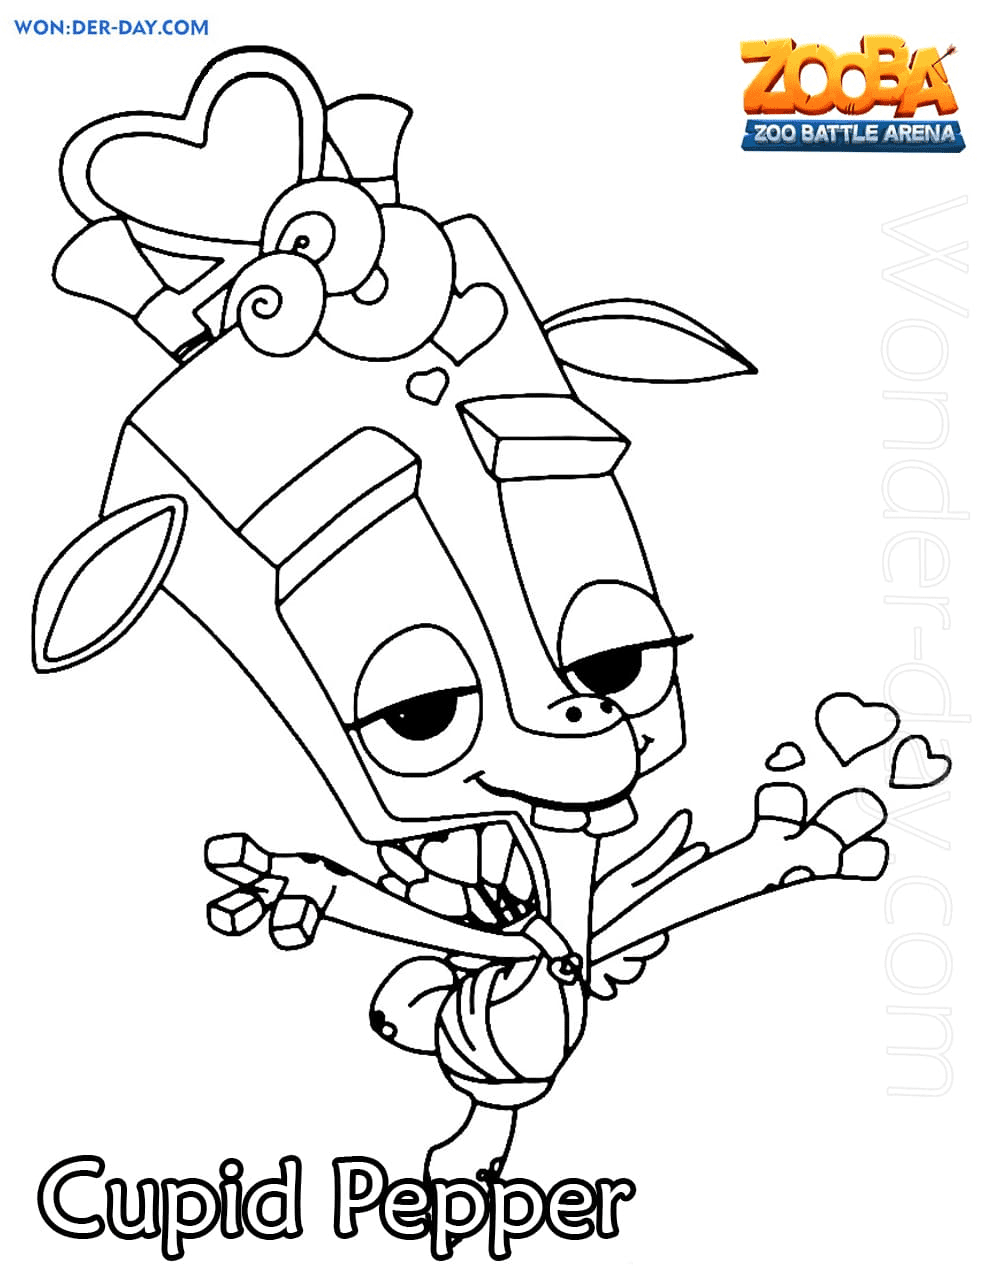 Cupid Pepper Zooba Coloring Pages